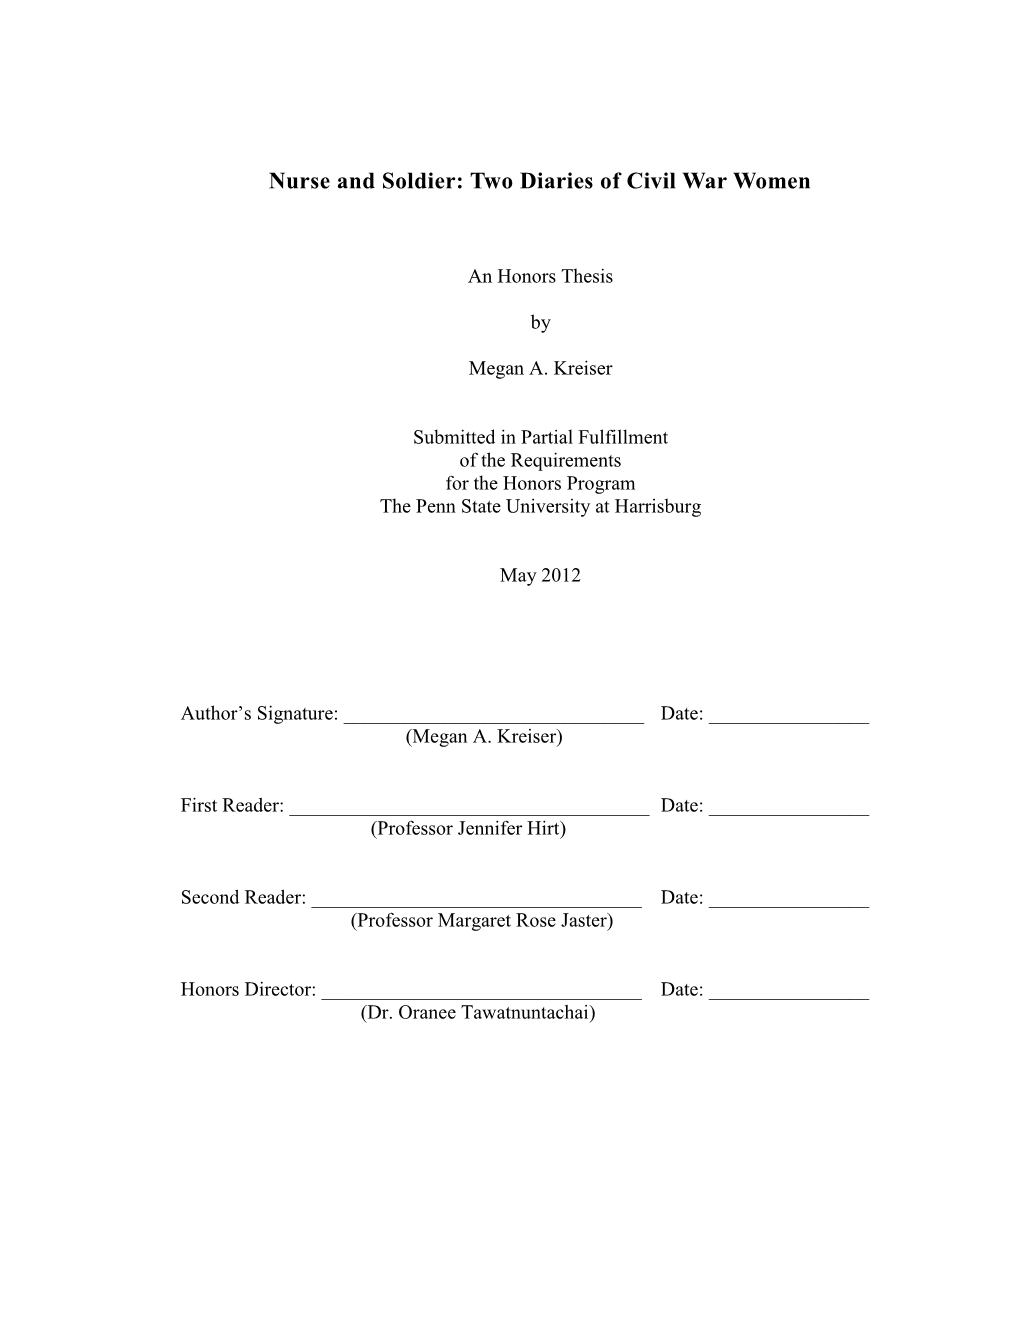 Nurse and Soldier: Two Diaries of Civil War Women